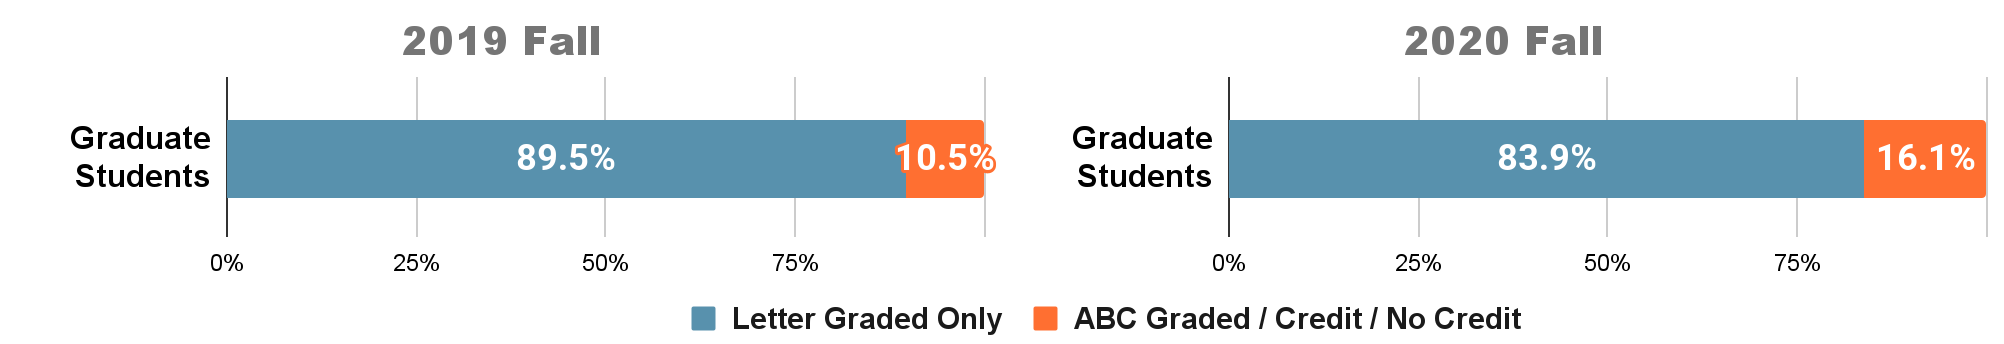 Comparison of Grade Bases Selections 2019 Fall to 2020 Fall: Degree-Seeking Graduate Students. See Accessible Data Table below.